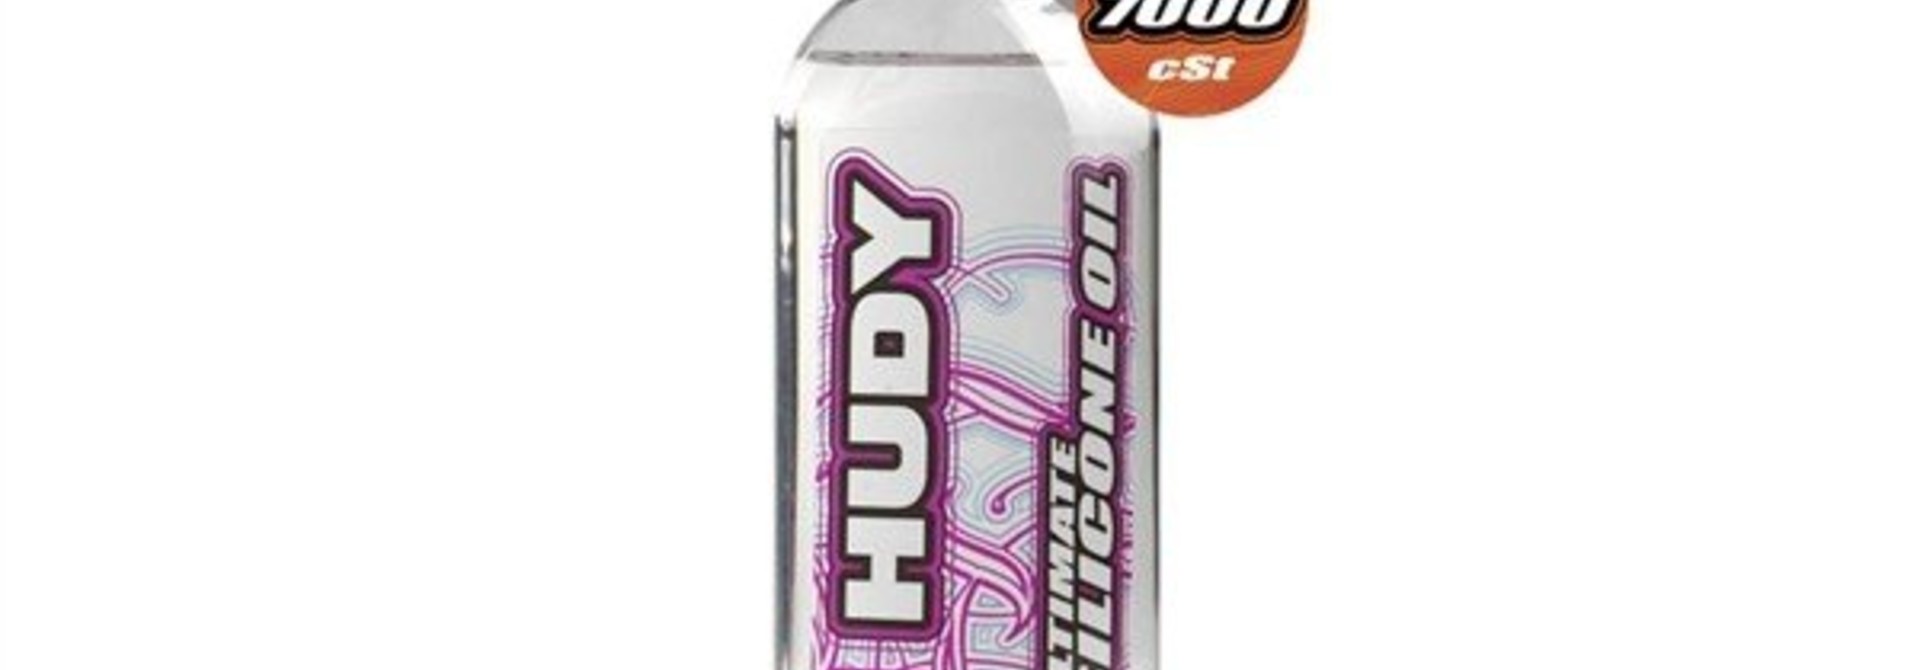 HUDY ULTIMATE SILICONE OIL 7000 cSt - 100ML. H106471